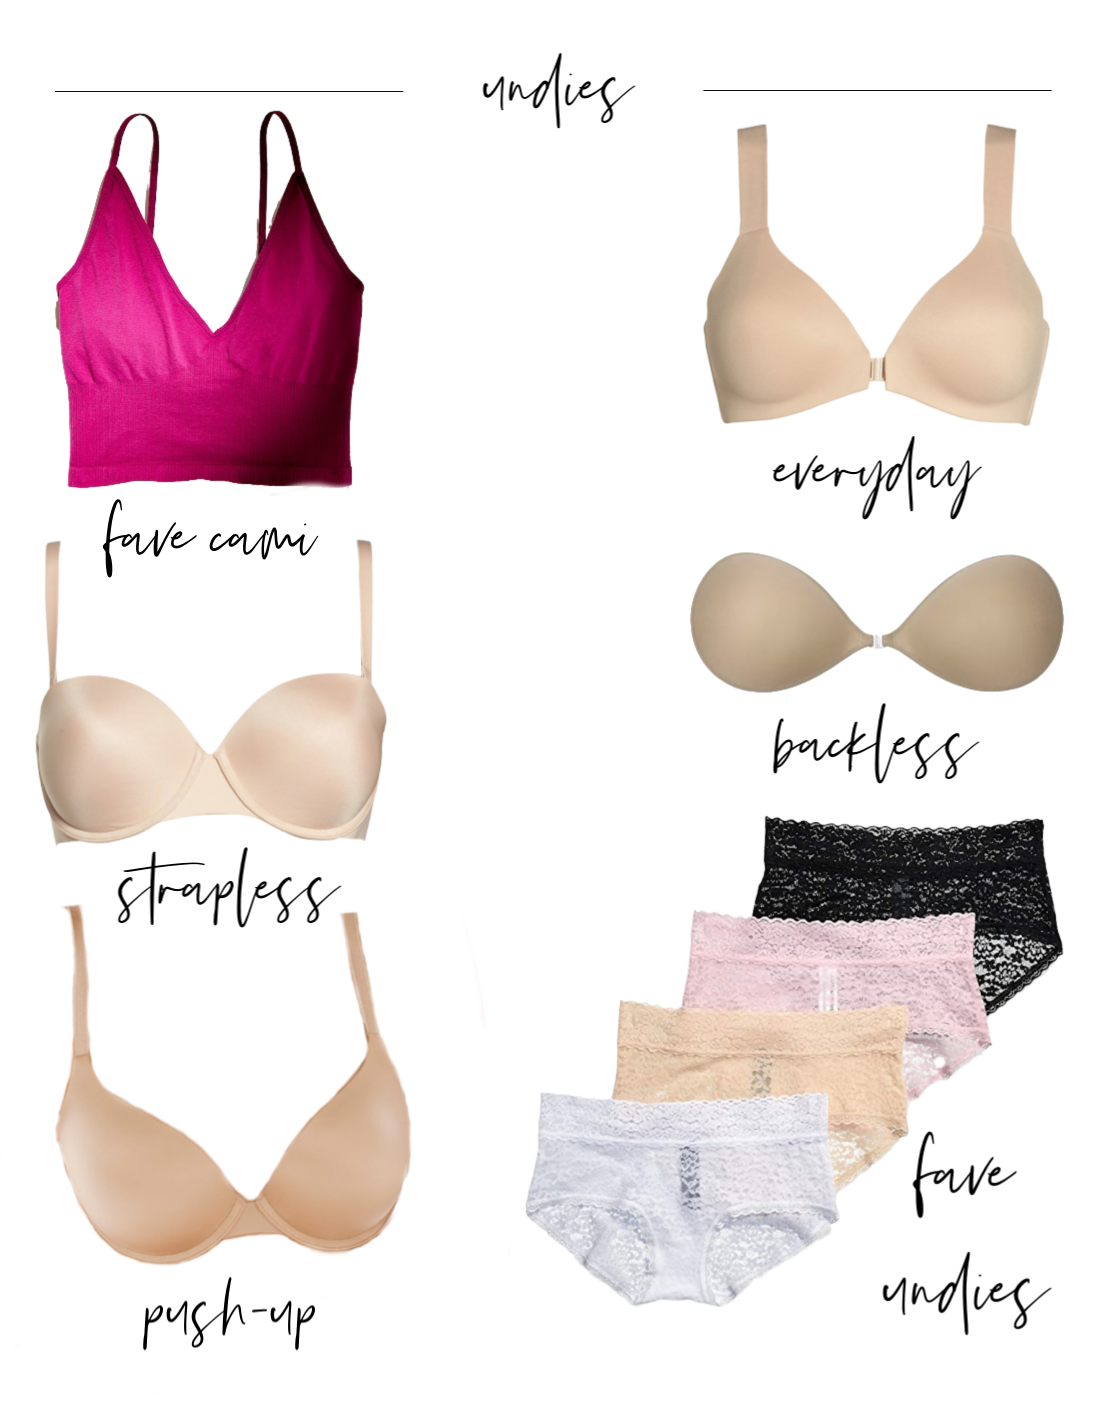 Now every woman can wear pretty underwear, whatever their bra size